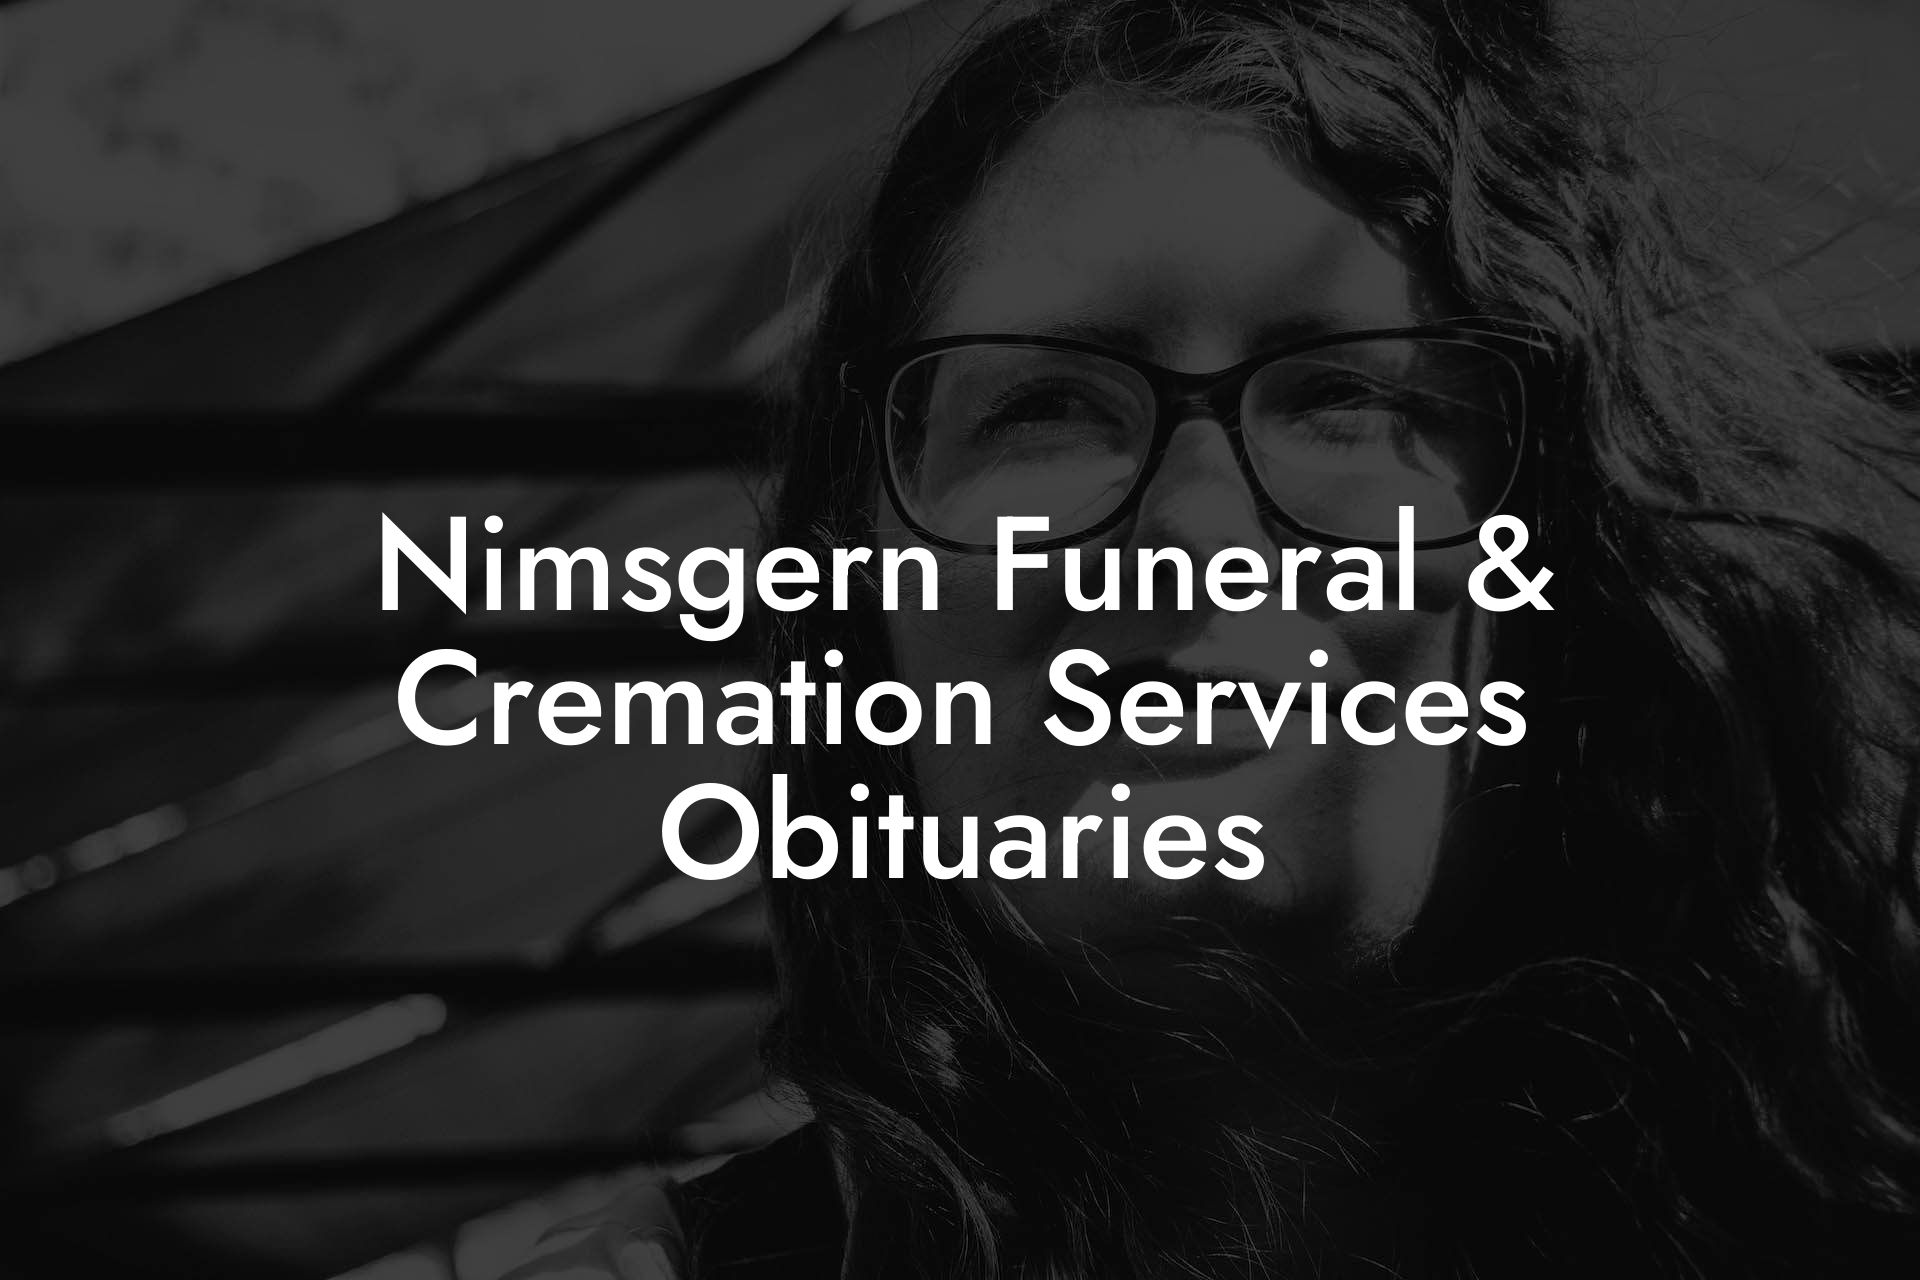 Nimsgern Funeral & Cremation Services Obituaries